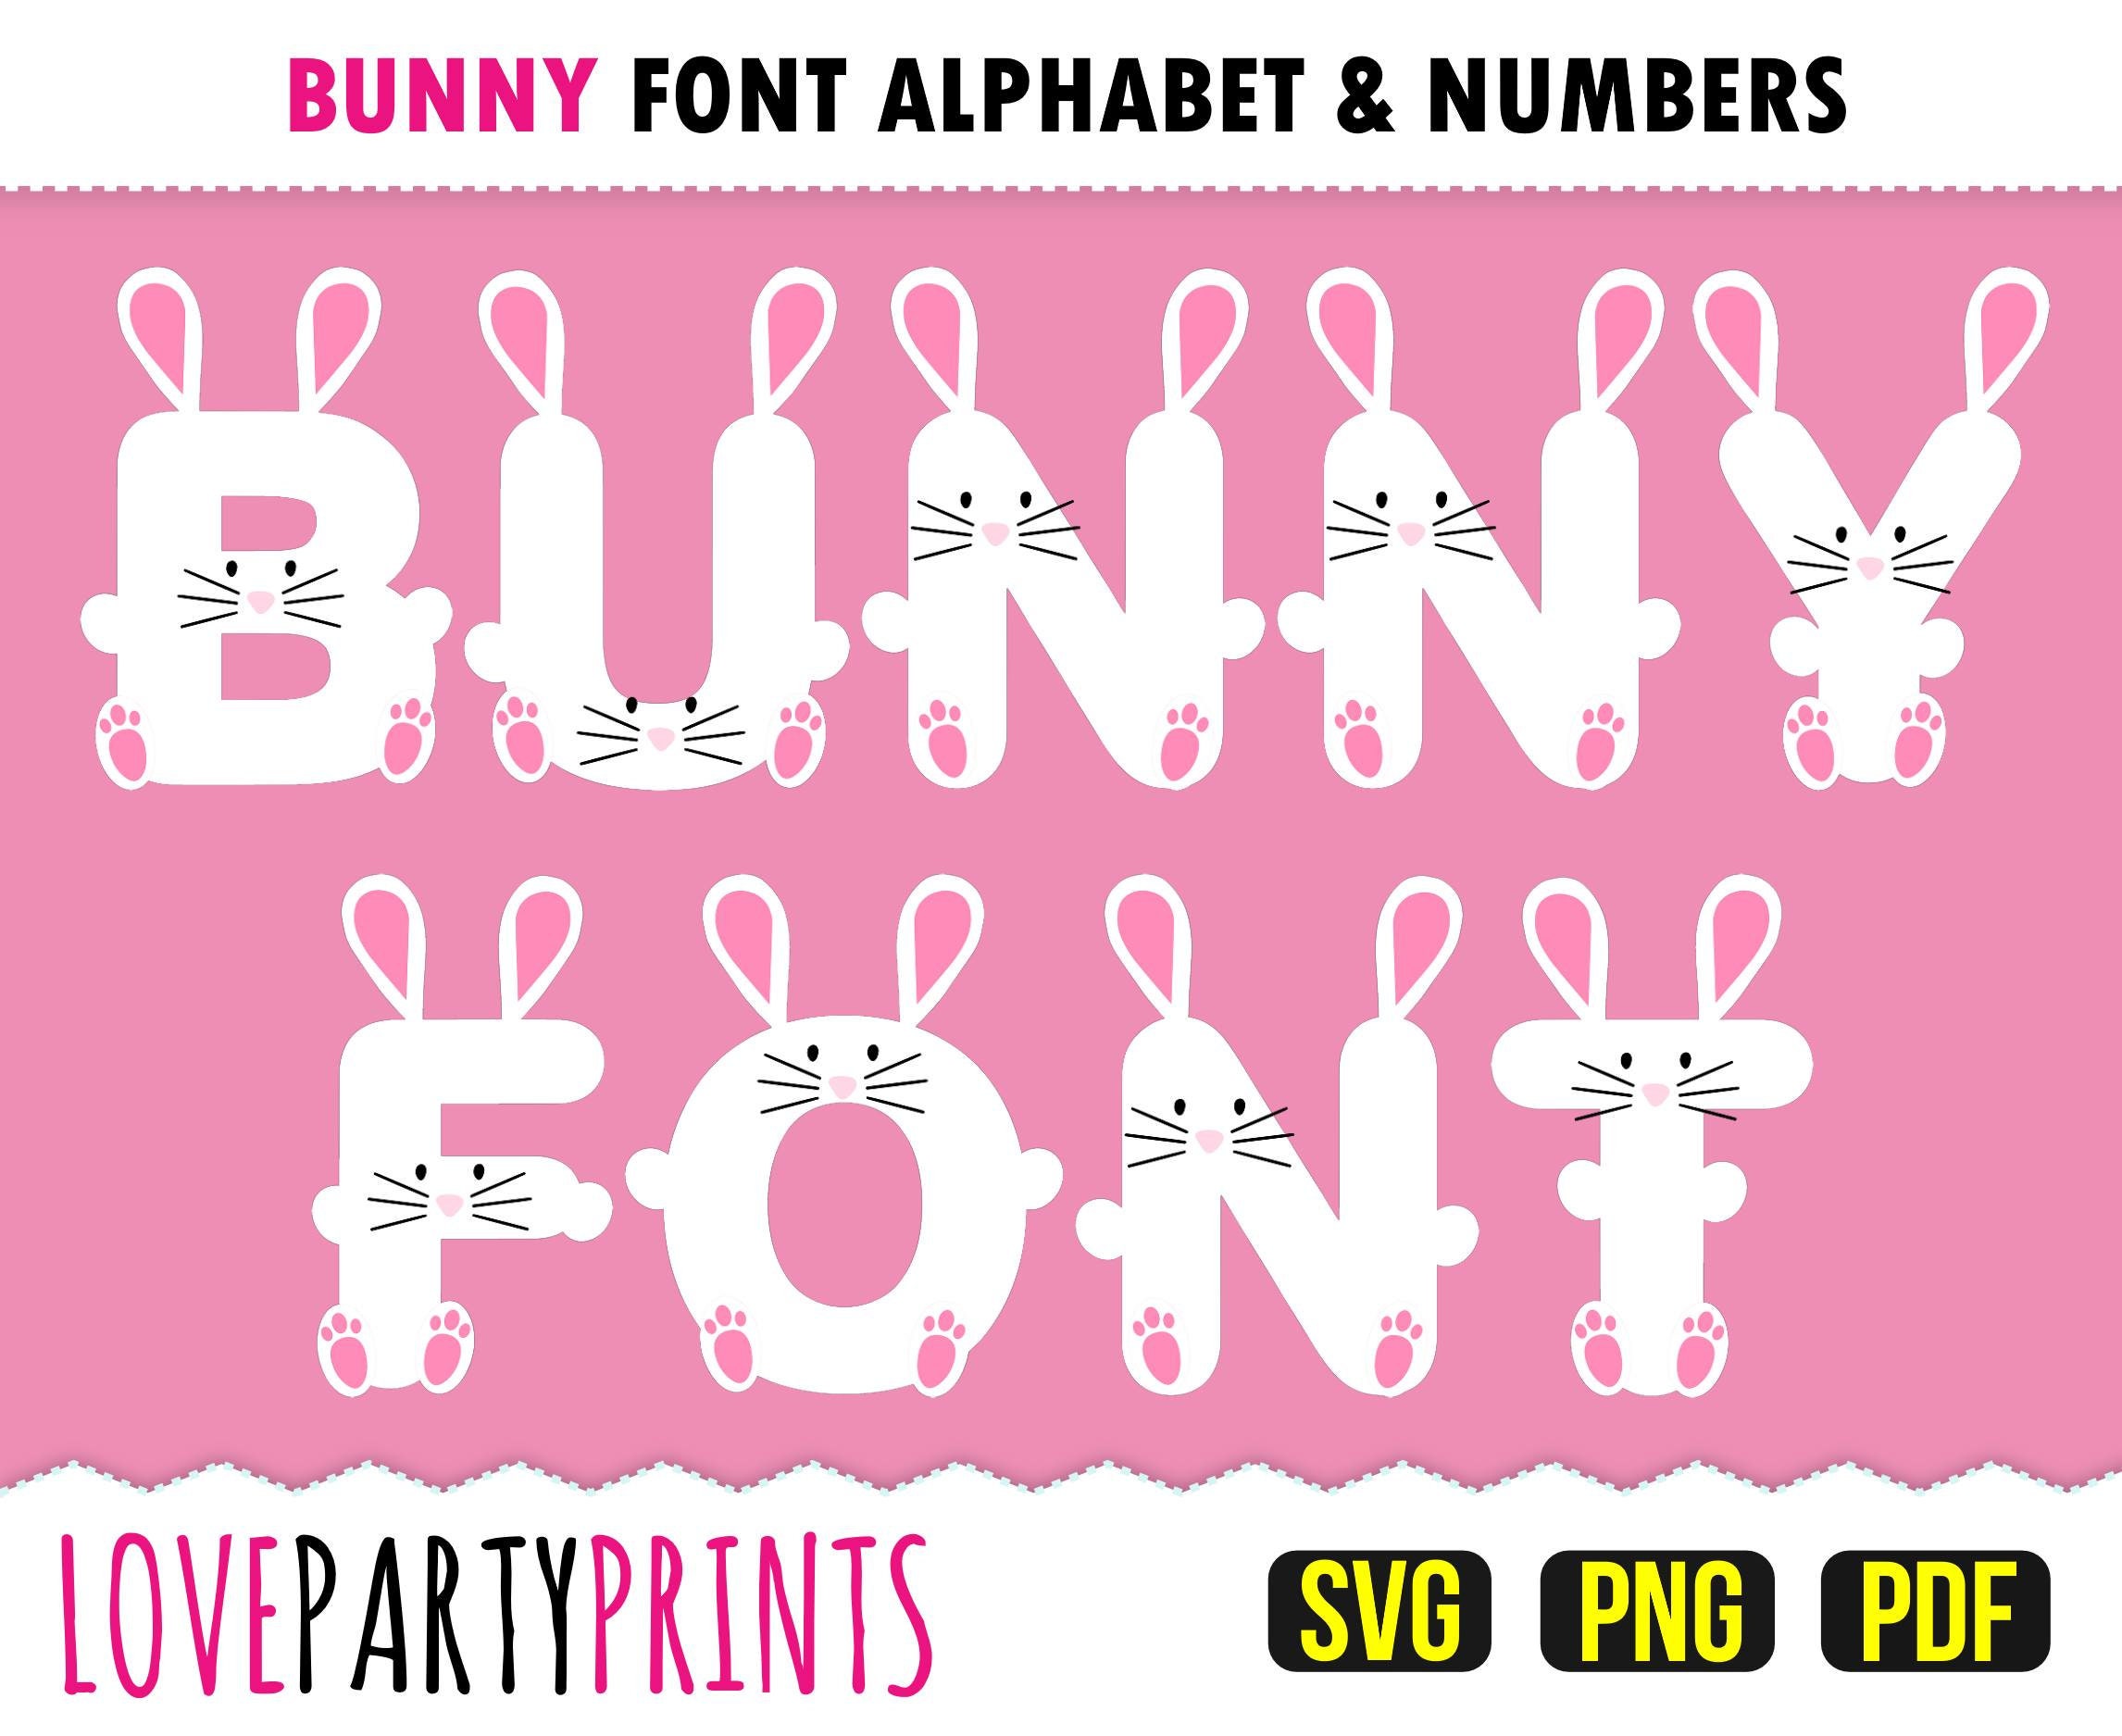 BUNNY FONT SVG and Png, Bunny Letters Svg, Bunny Numbers Svg